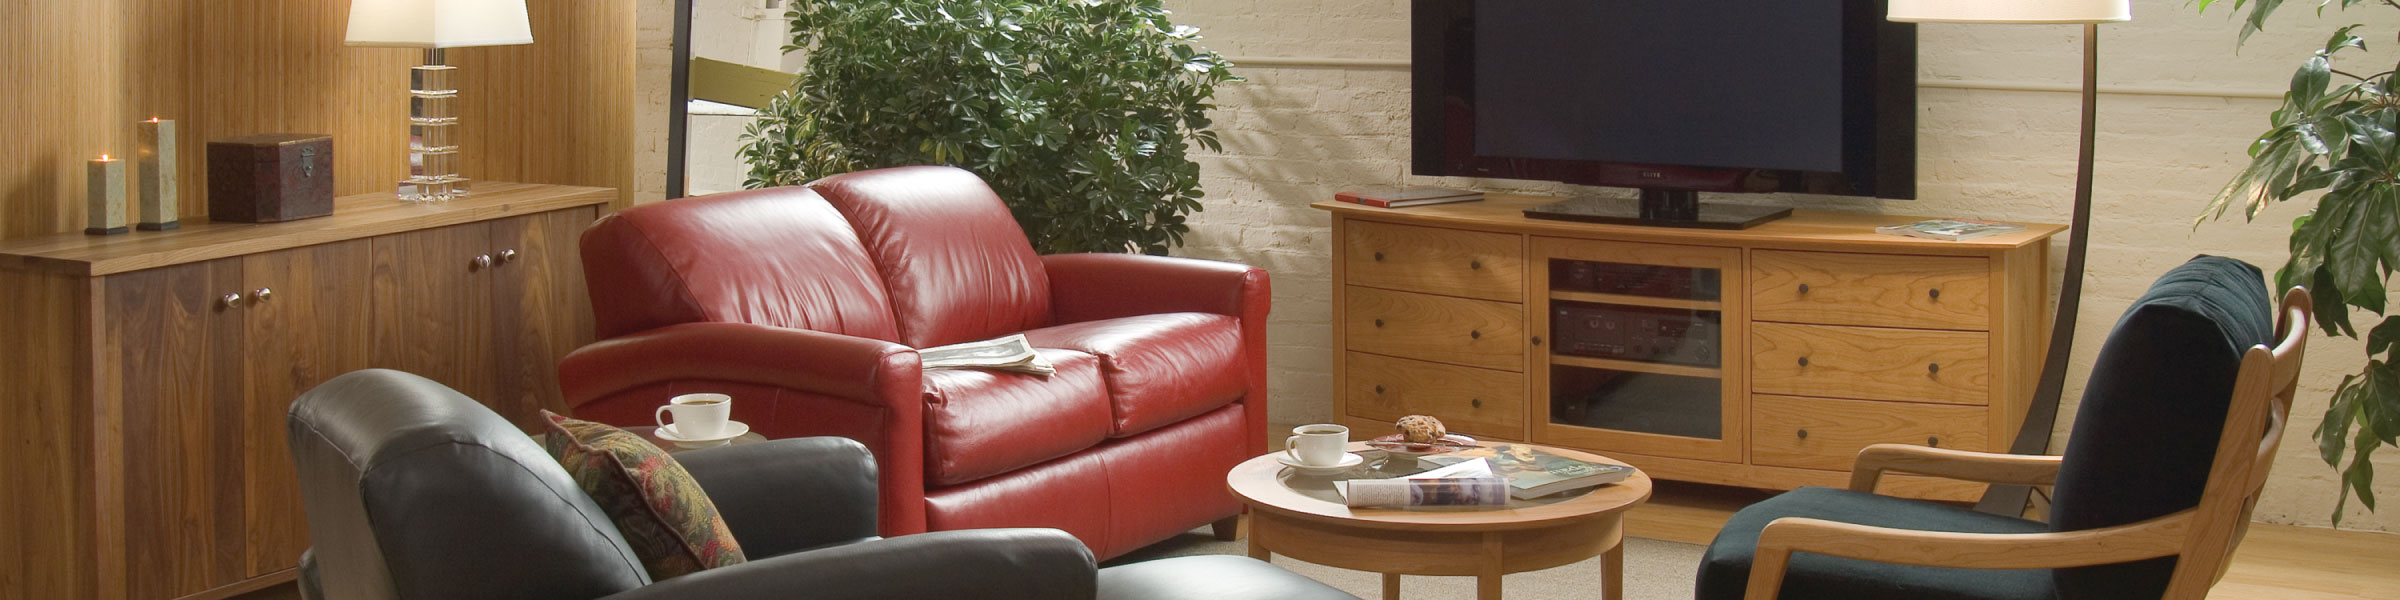 red leather couch in front of entertainment center with TV